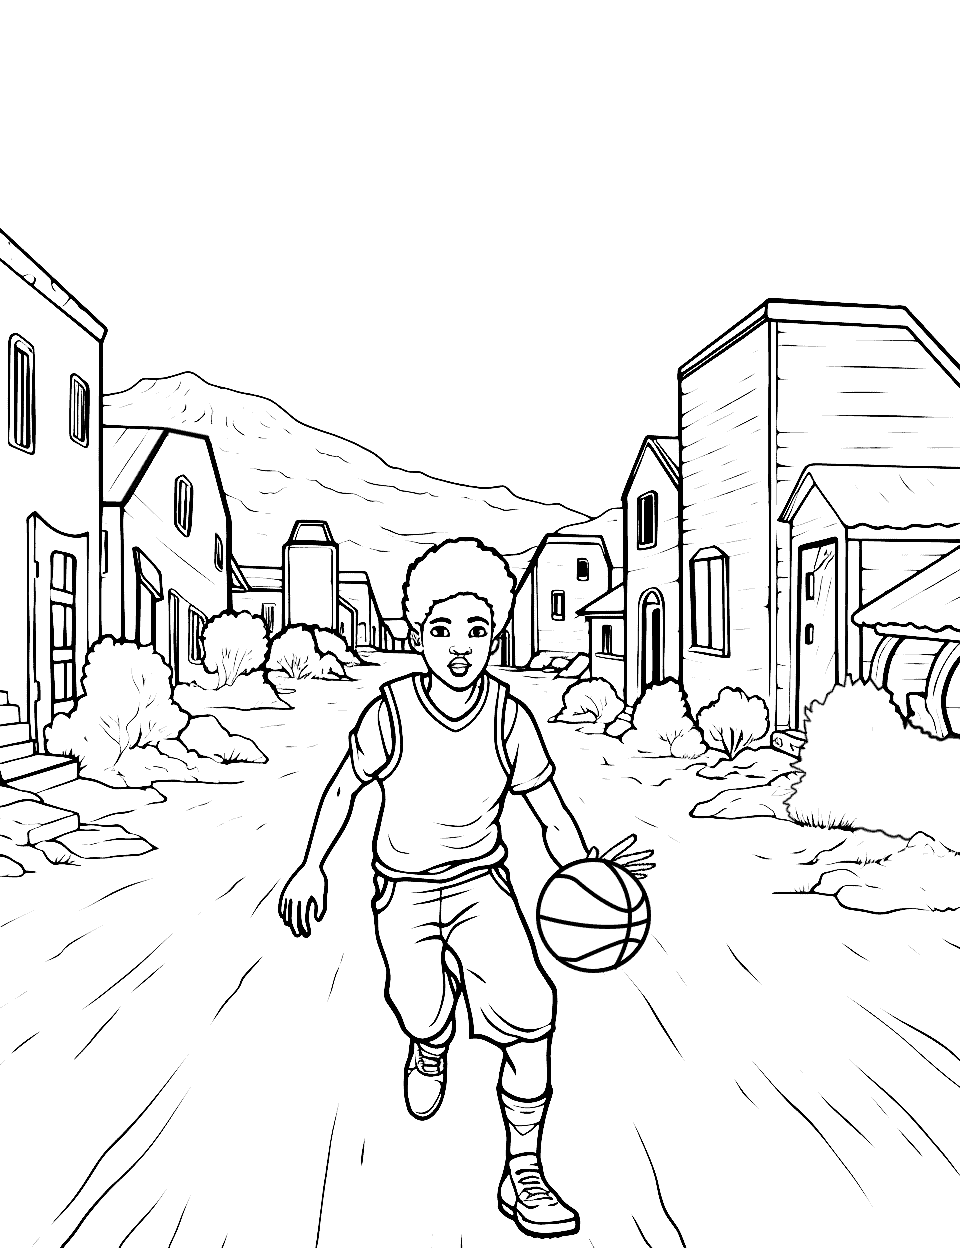 Wild West Shootout Basketball Coloring Page - A Wild West scene with a basketball player in a dusty town.